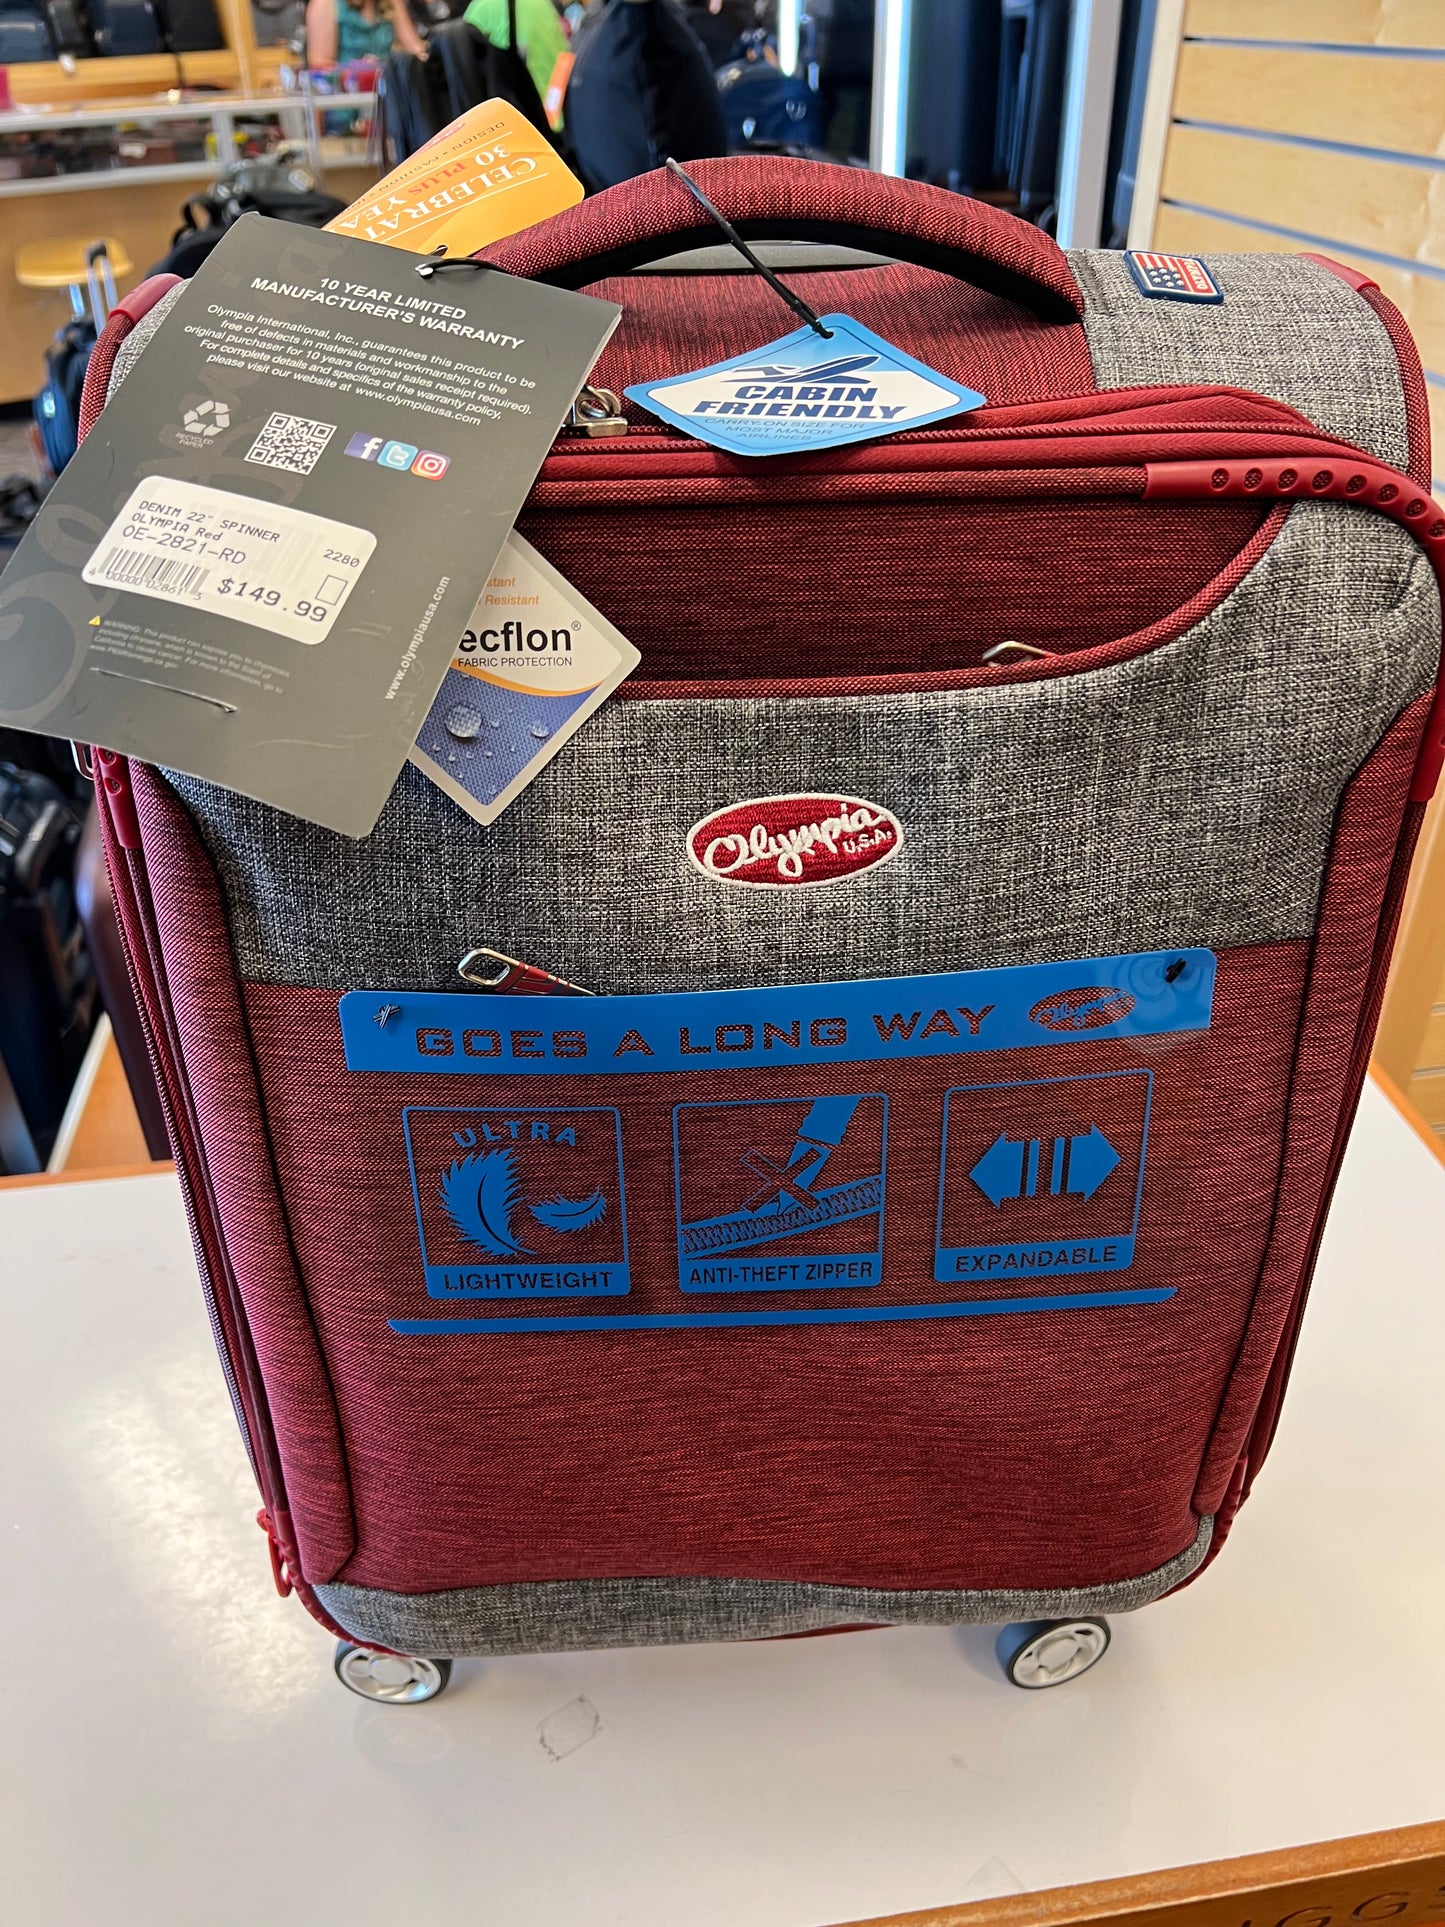 FINAL SALE - Olympia Denim 22” Carry-On Softside Spinner (Red)- OE-2621